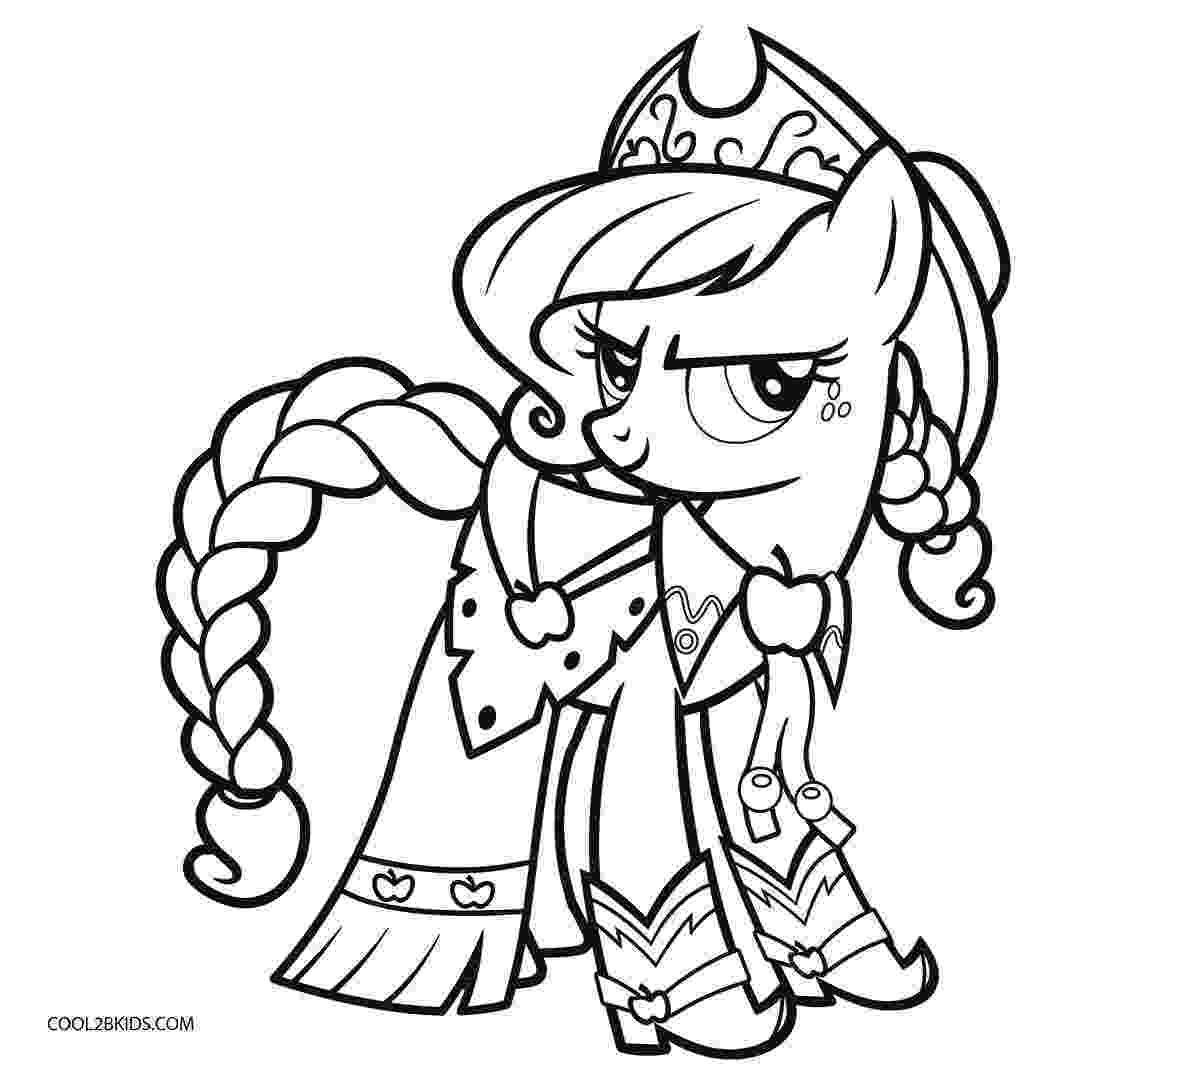 my little pony picters my little pony coloring pages friendship is magic team pony my picters little 